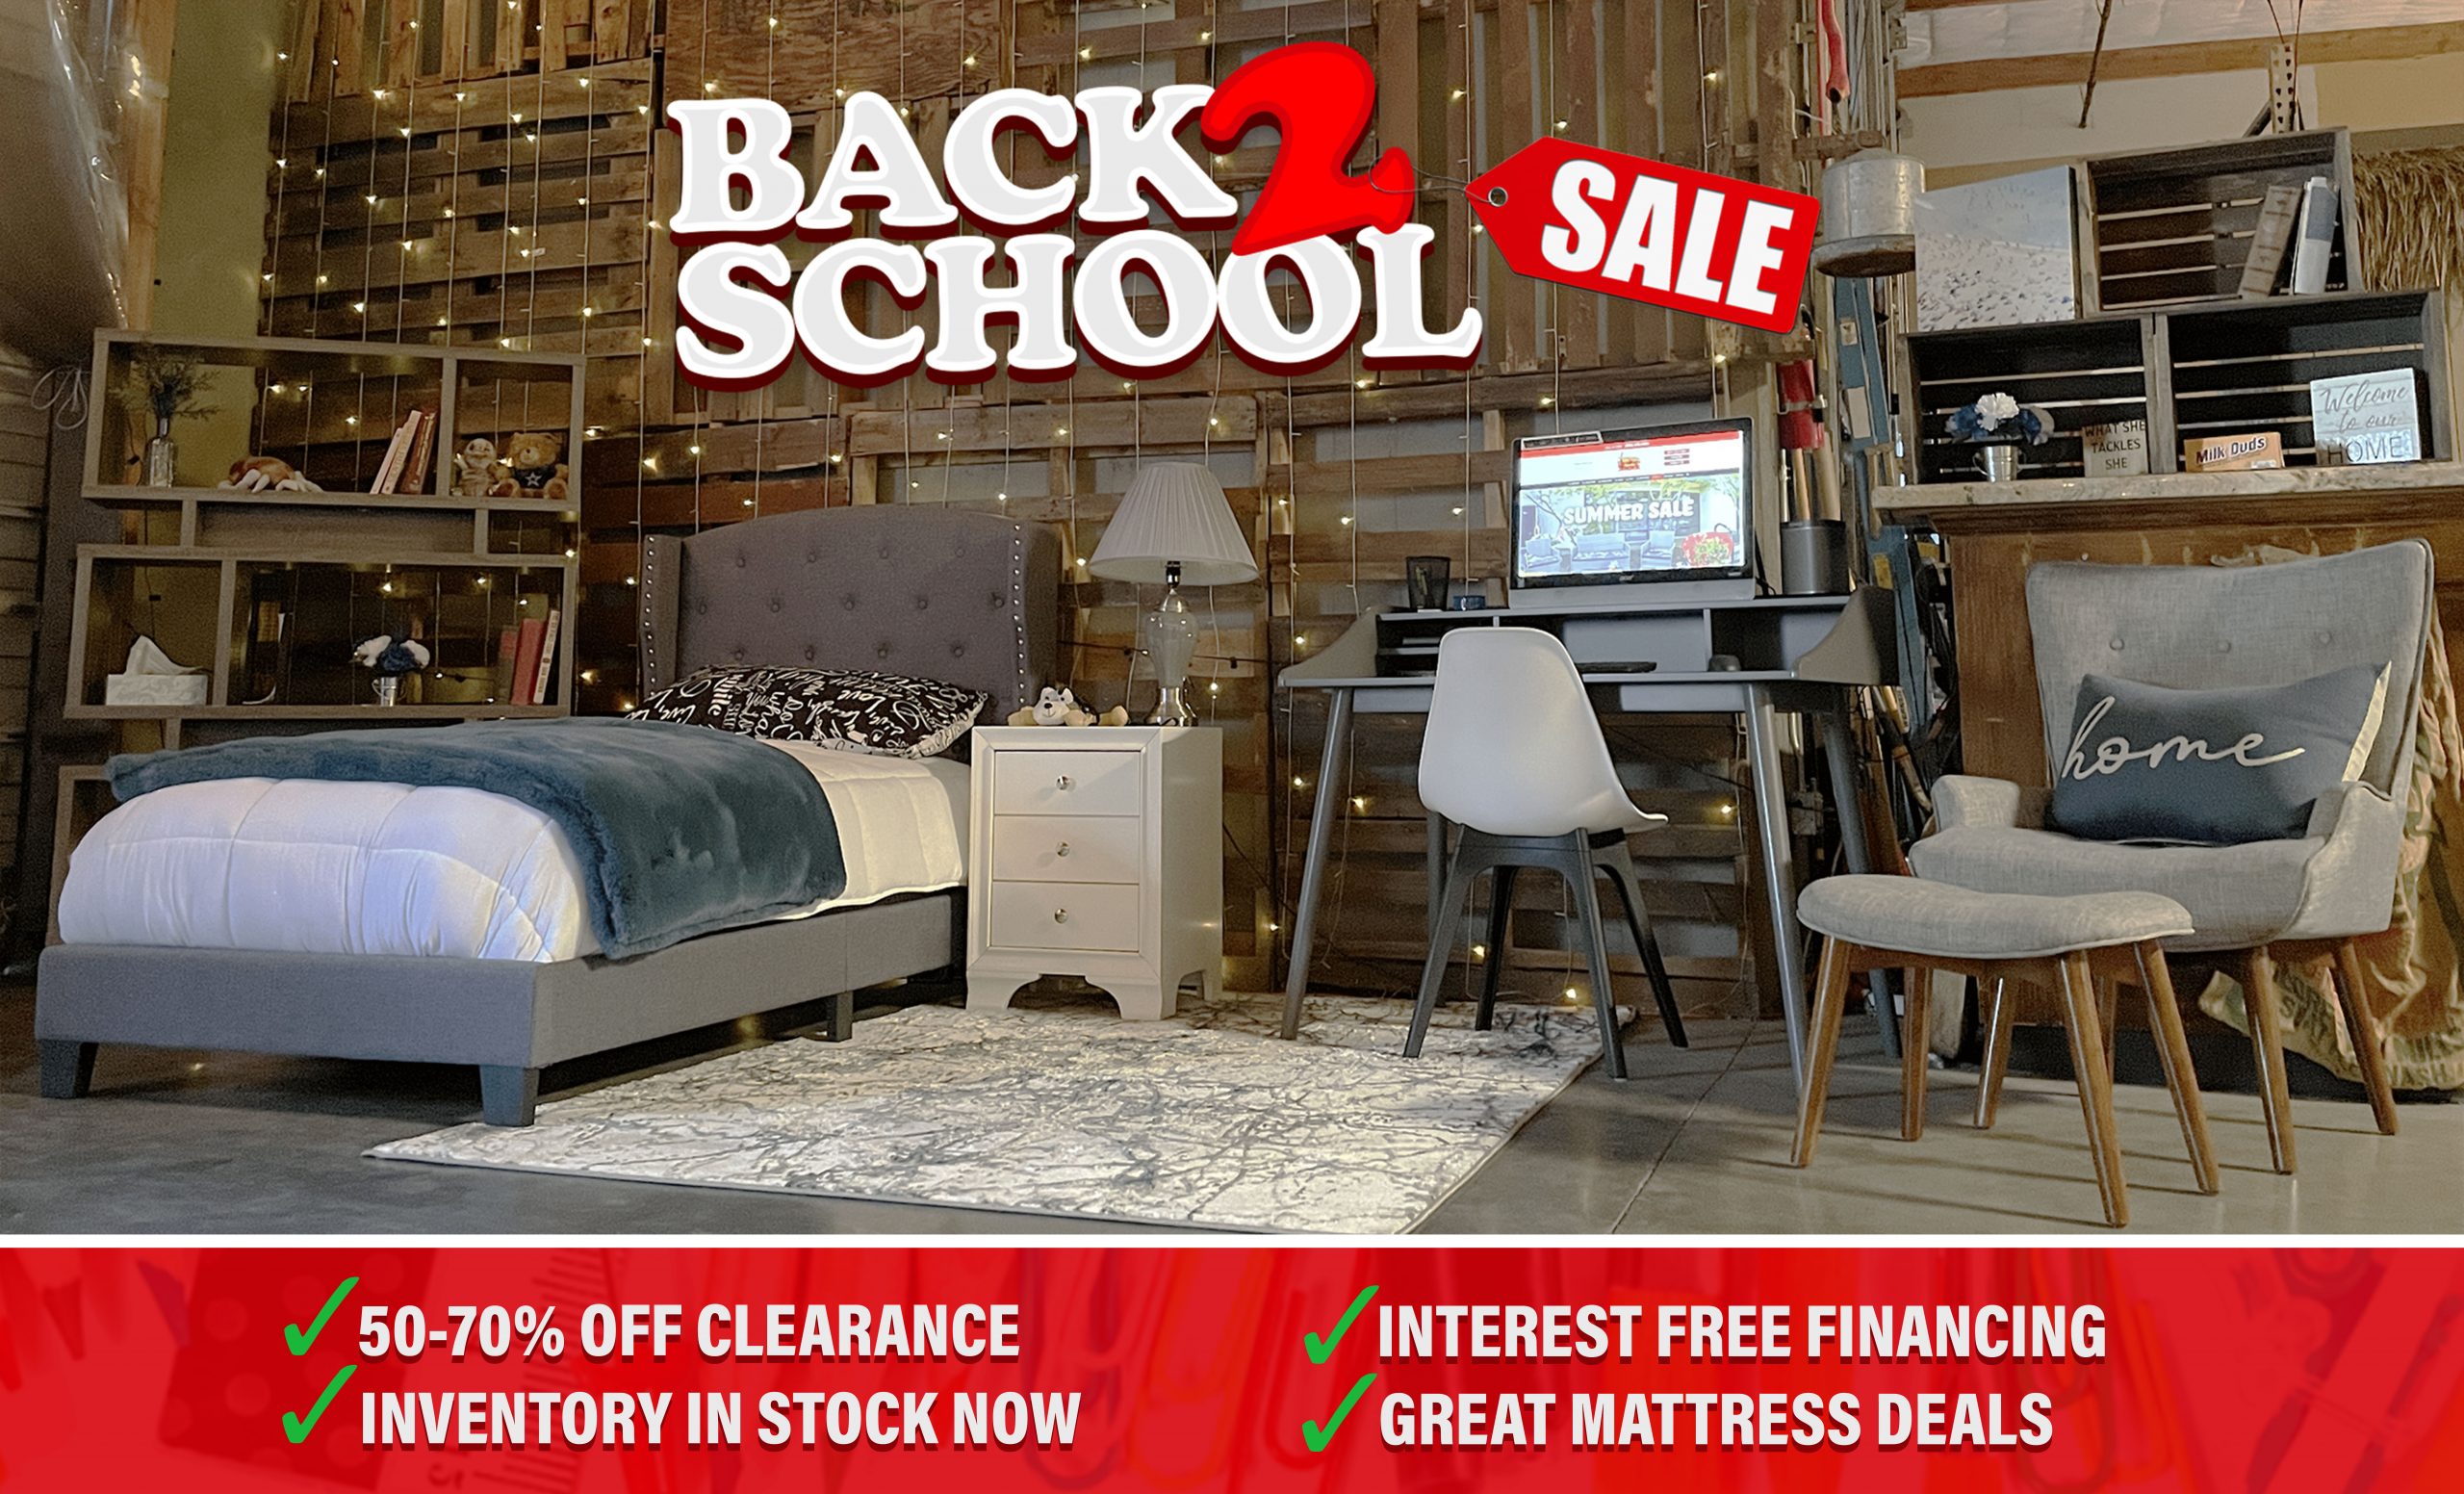 Back to School Sale at The Furniture Shack serving the entire Portland OR and Vancouver WA areas.